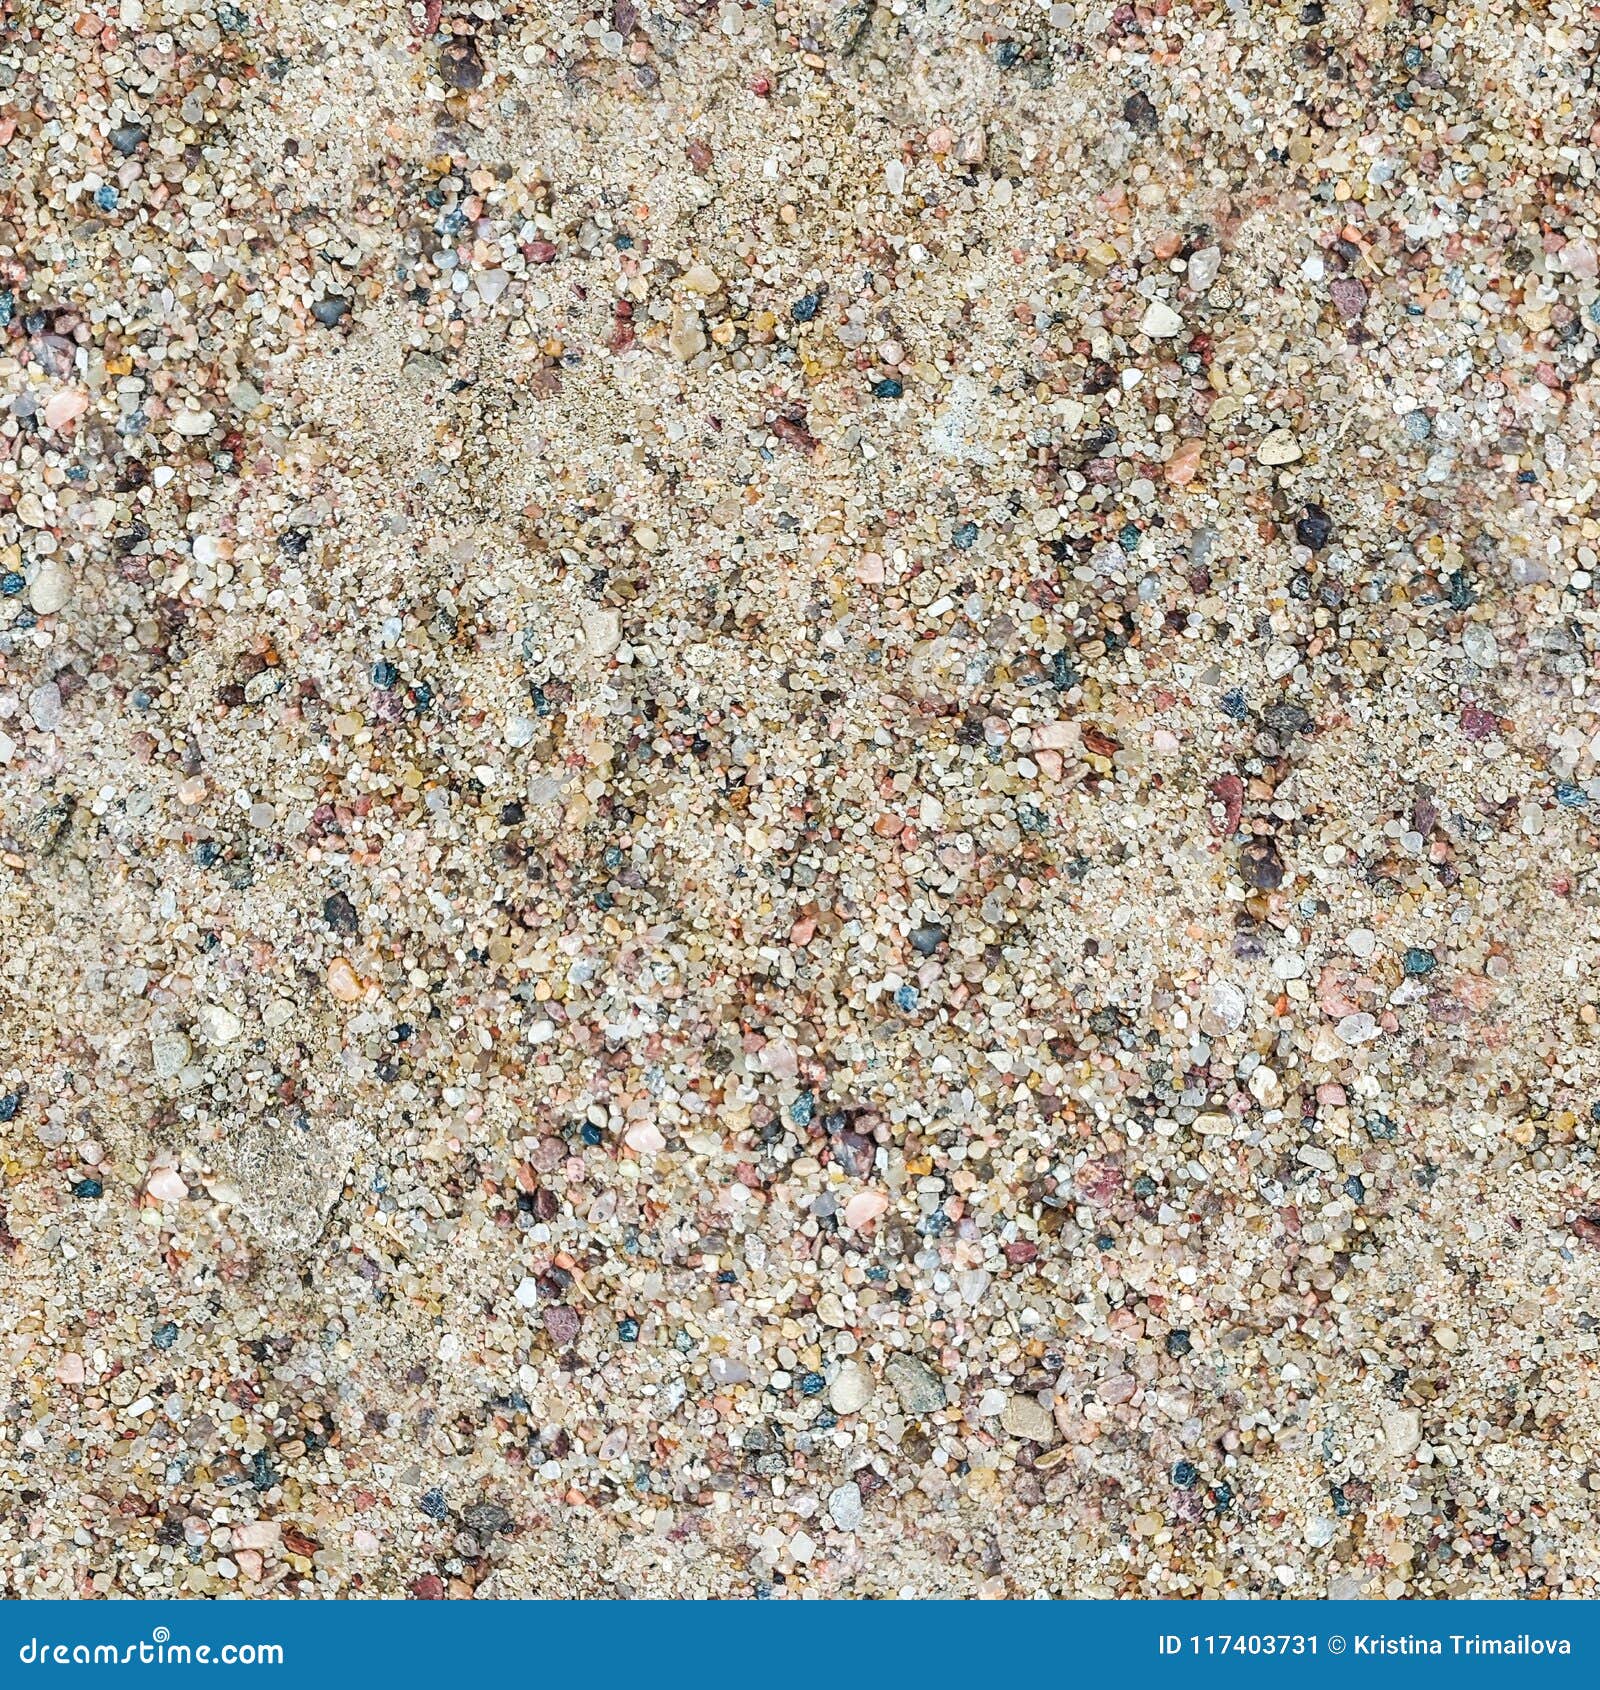 colorful sand or pebble texture. seamless texture